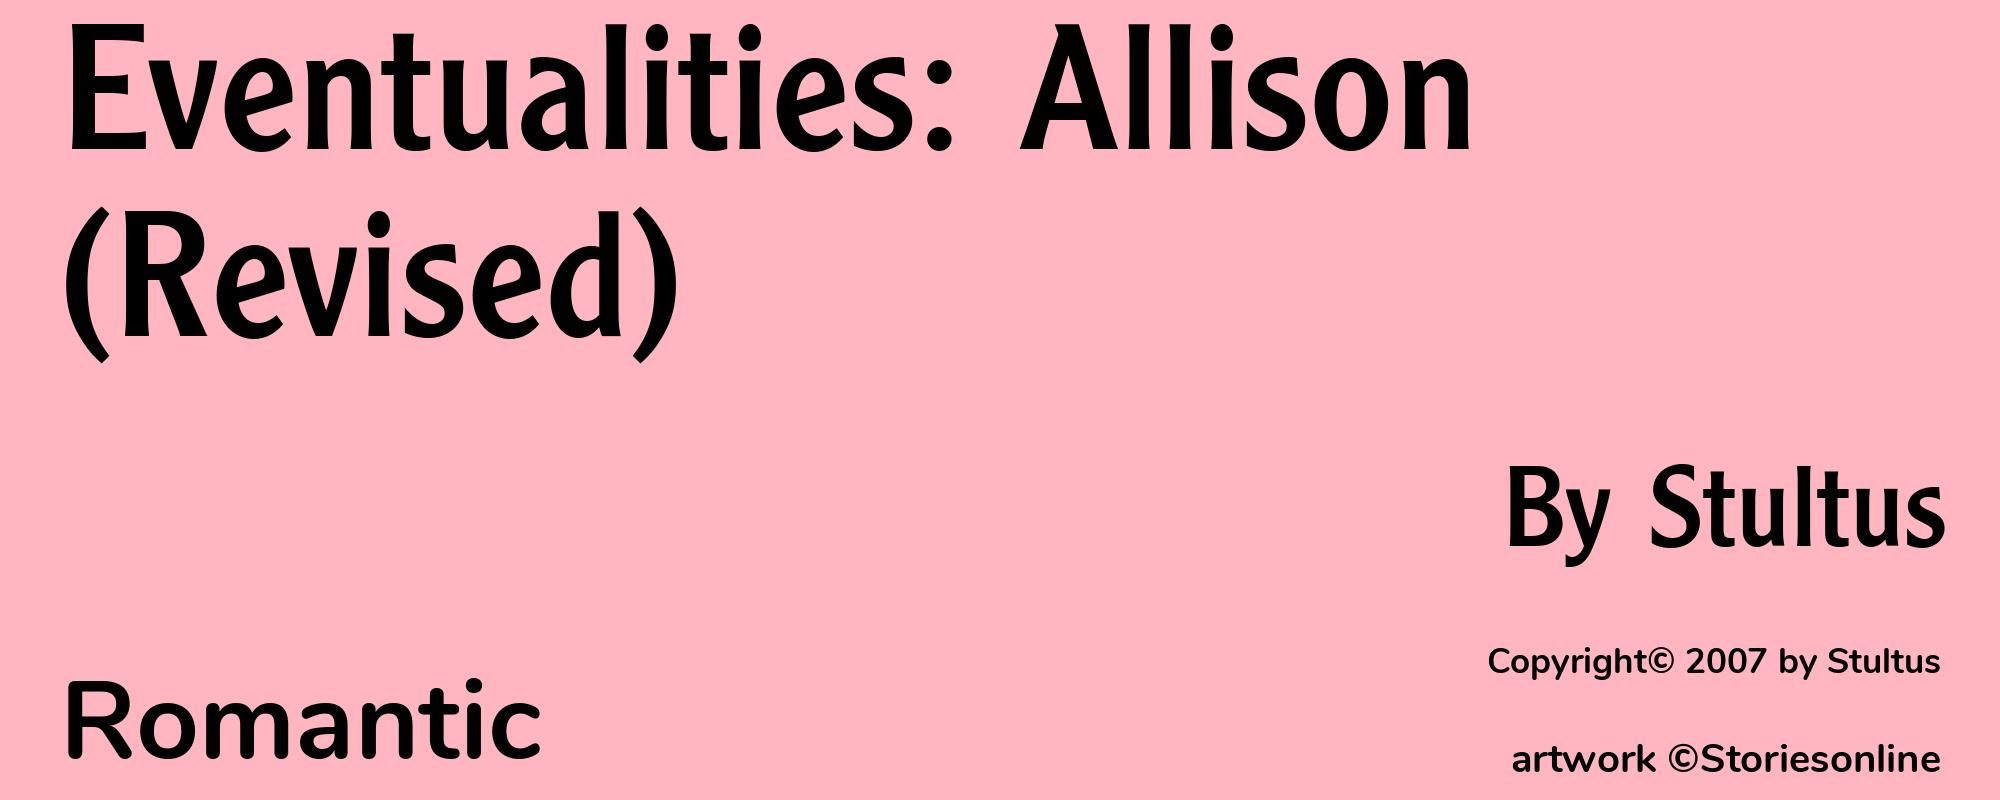 Eventualities: Allison (Revised) - Cover